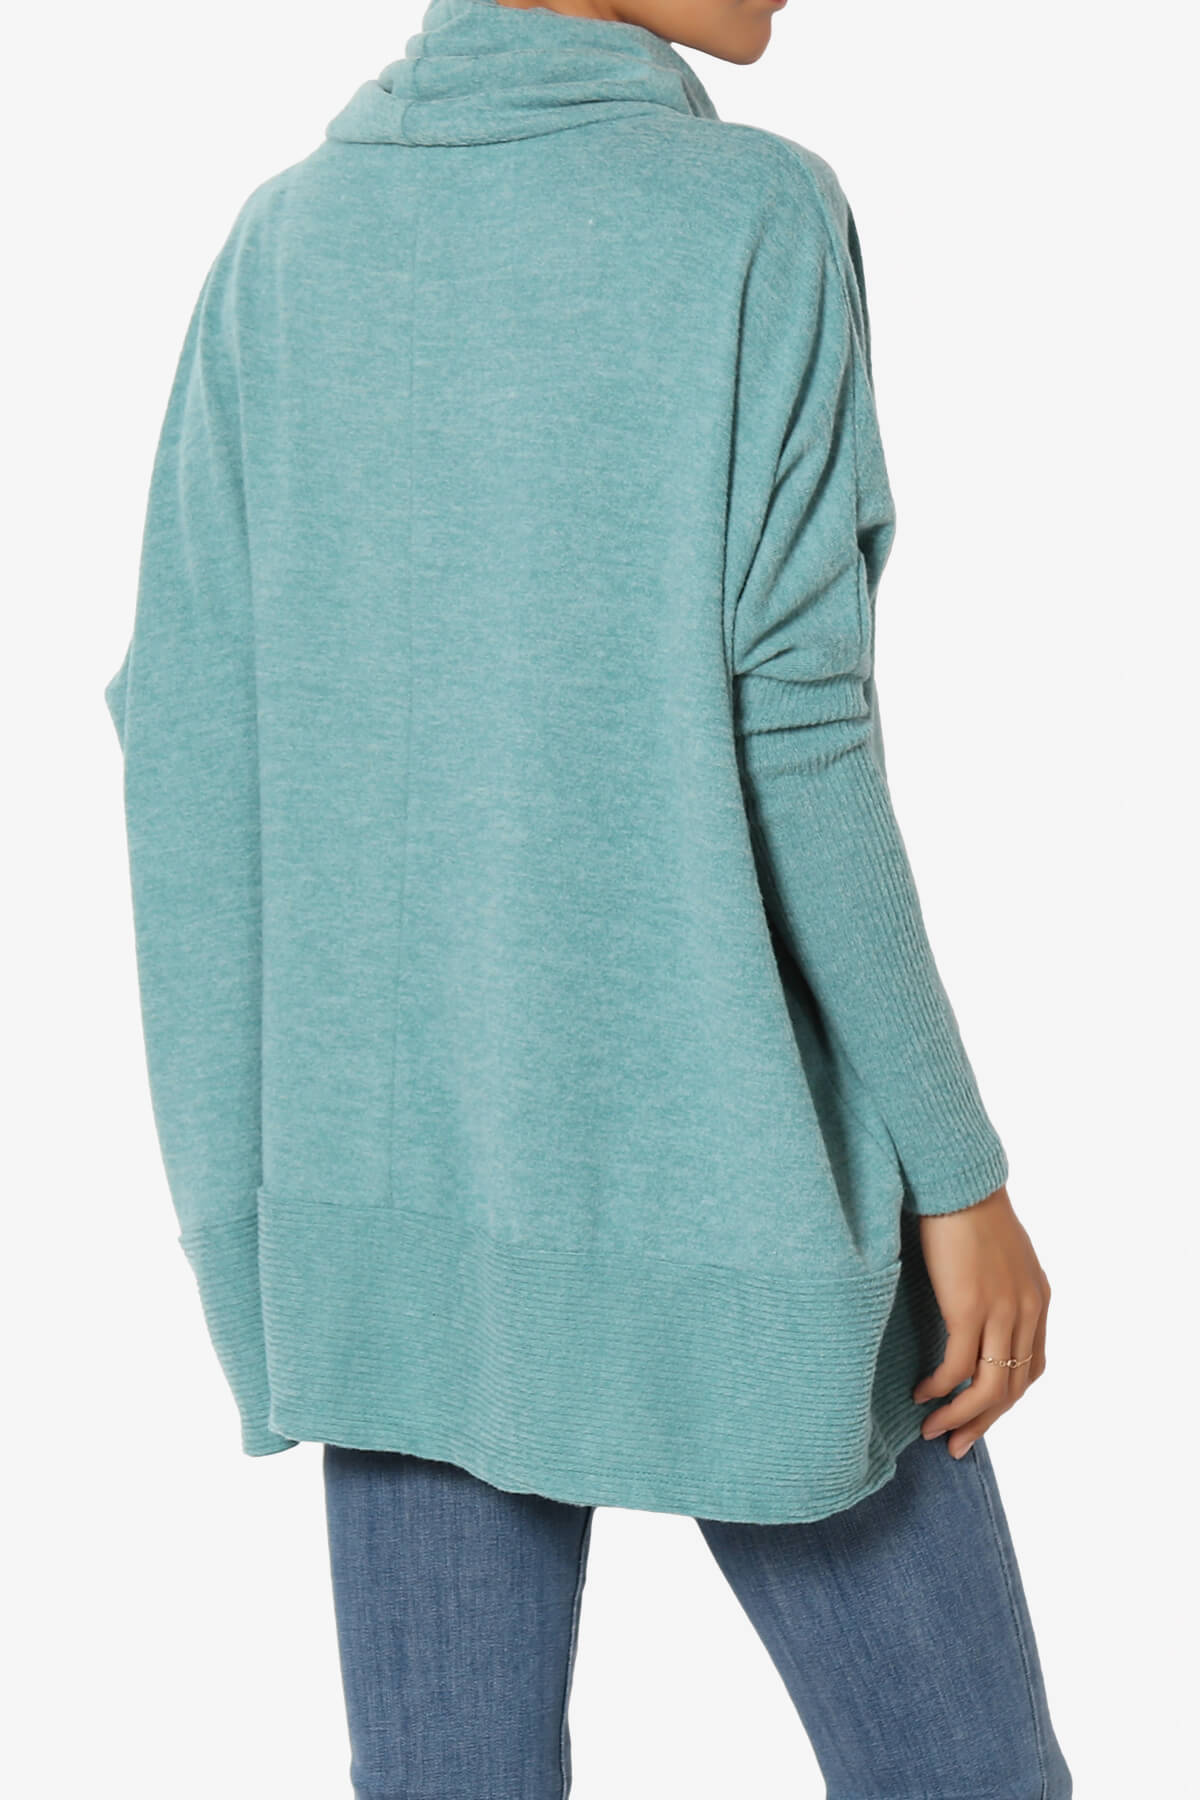 Load image into Gallery viewer, Barclay Cowl Neck Melange Knit Oversized Sweater DUSTY TEAL_4
